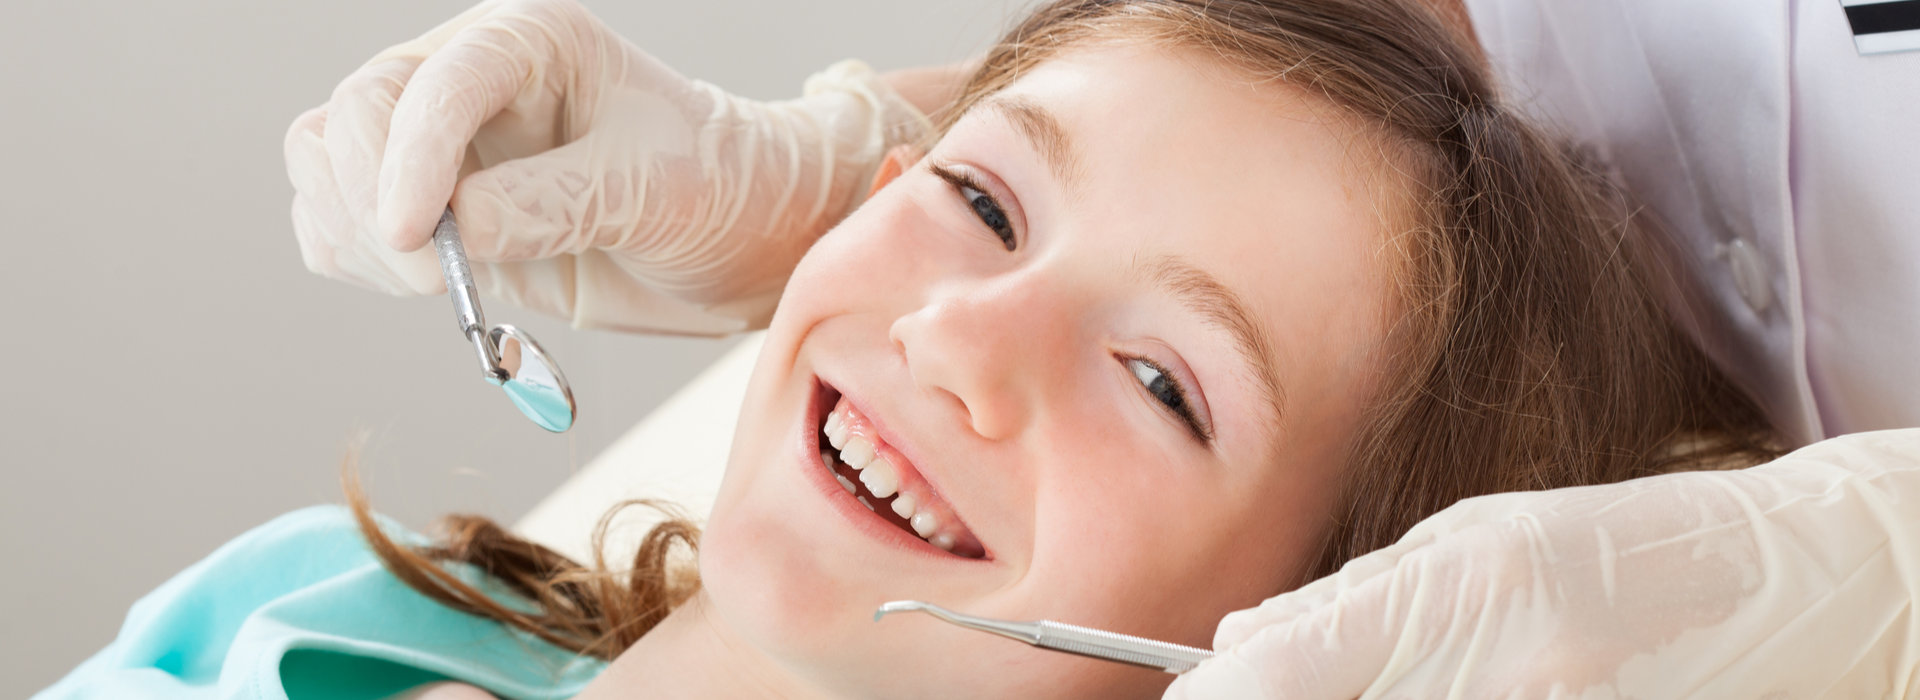 A child is smiling after Dental Sealants.